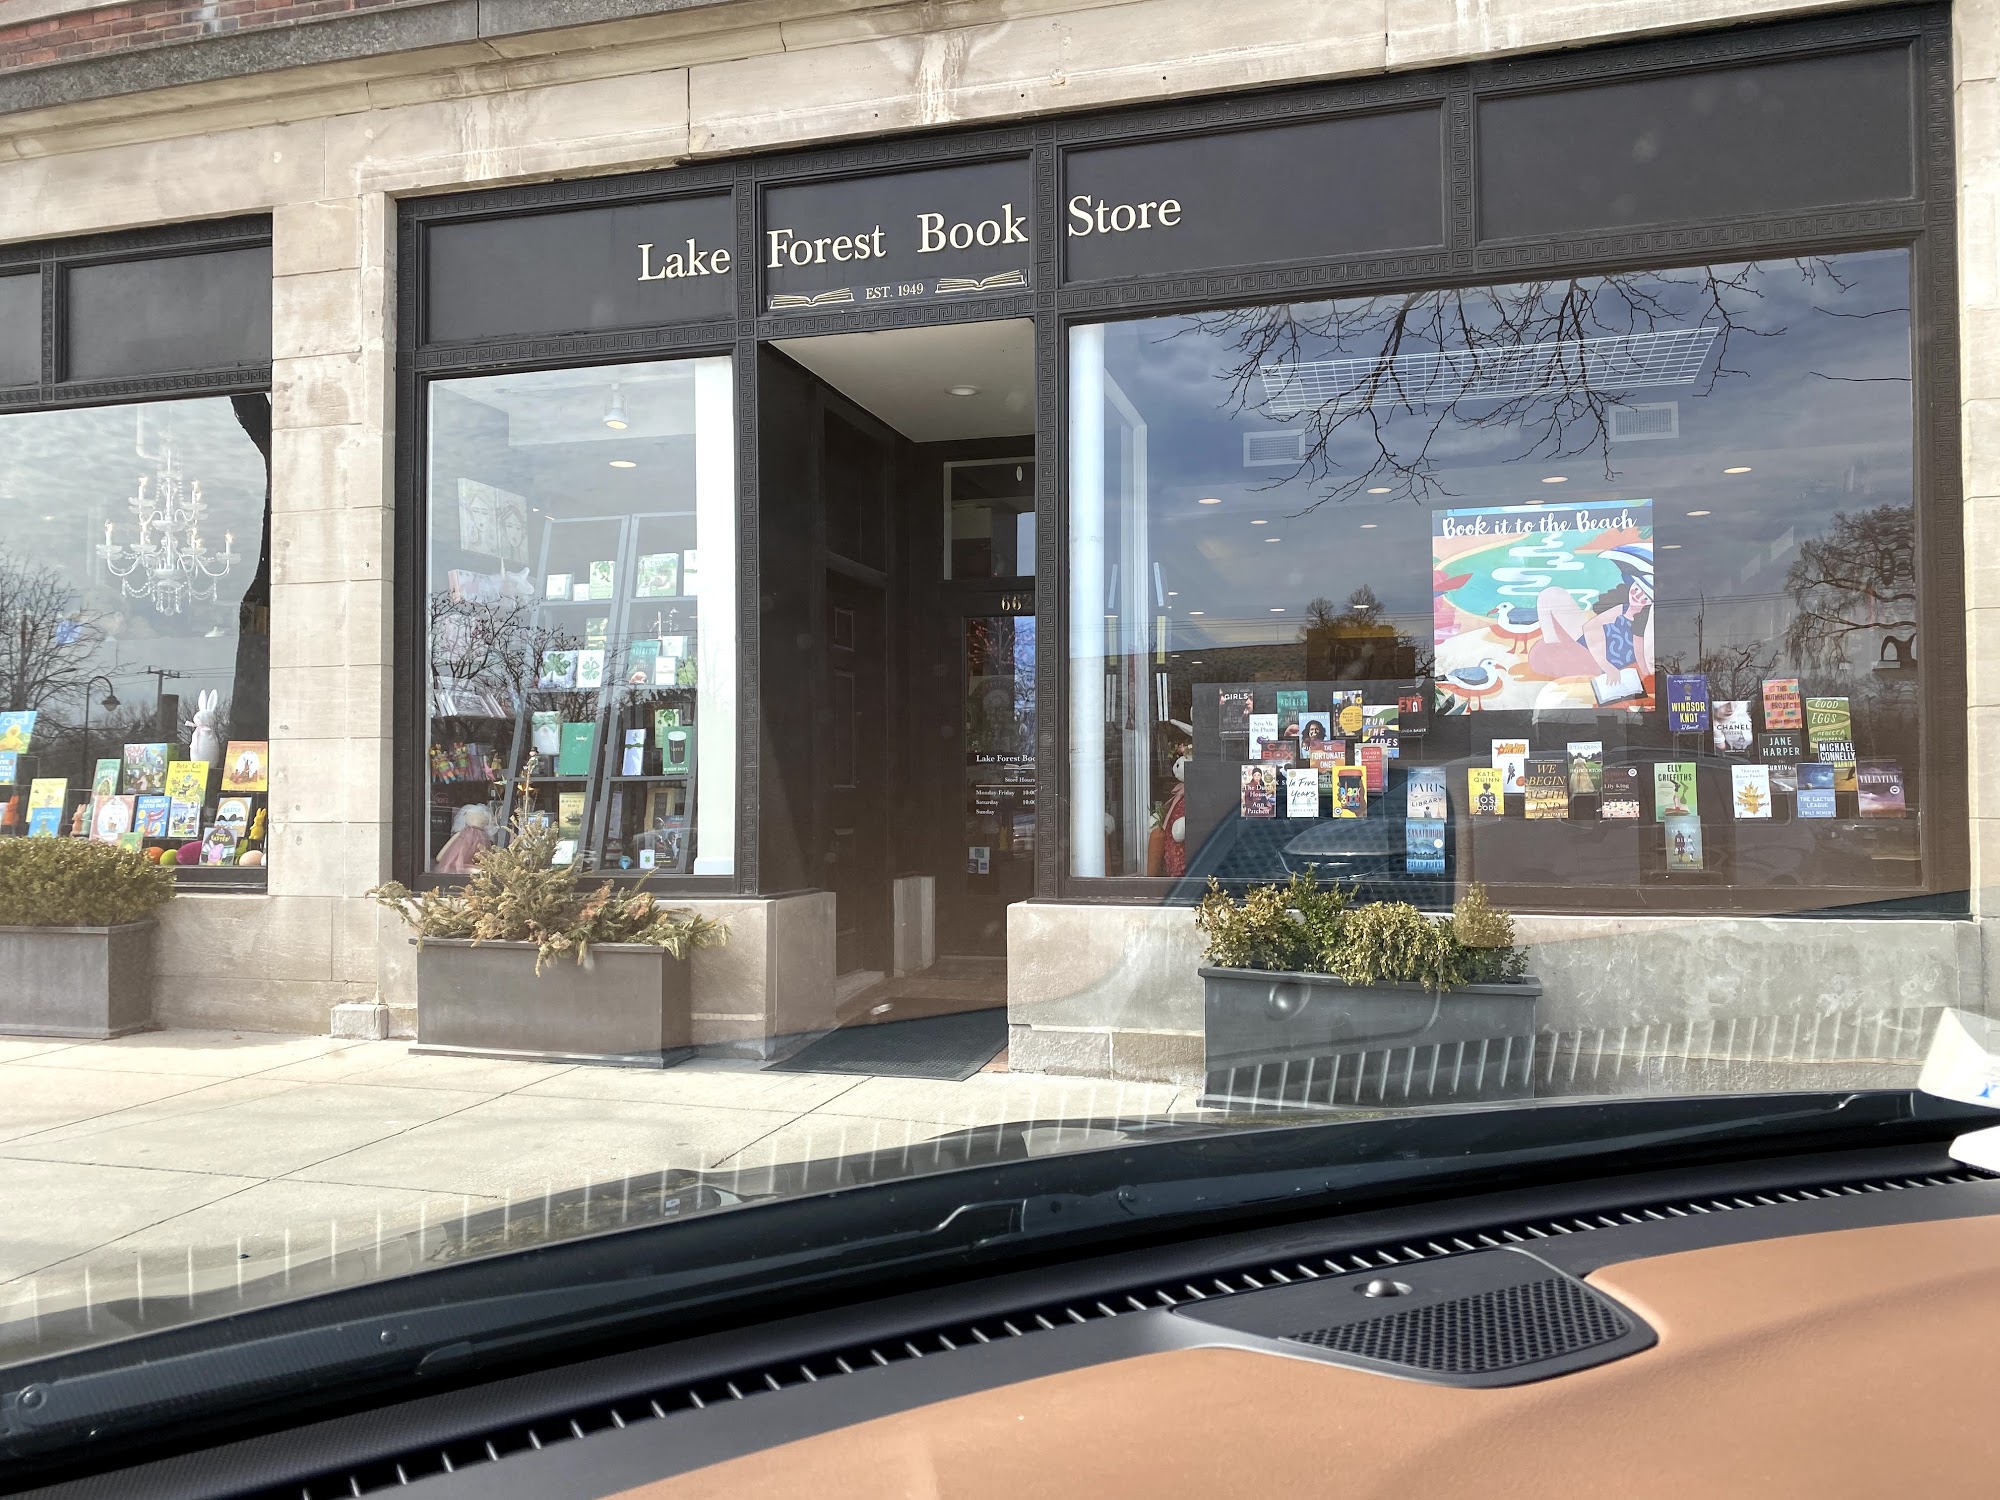 Lake Forest Book Store